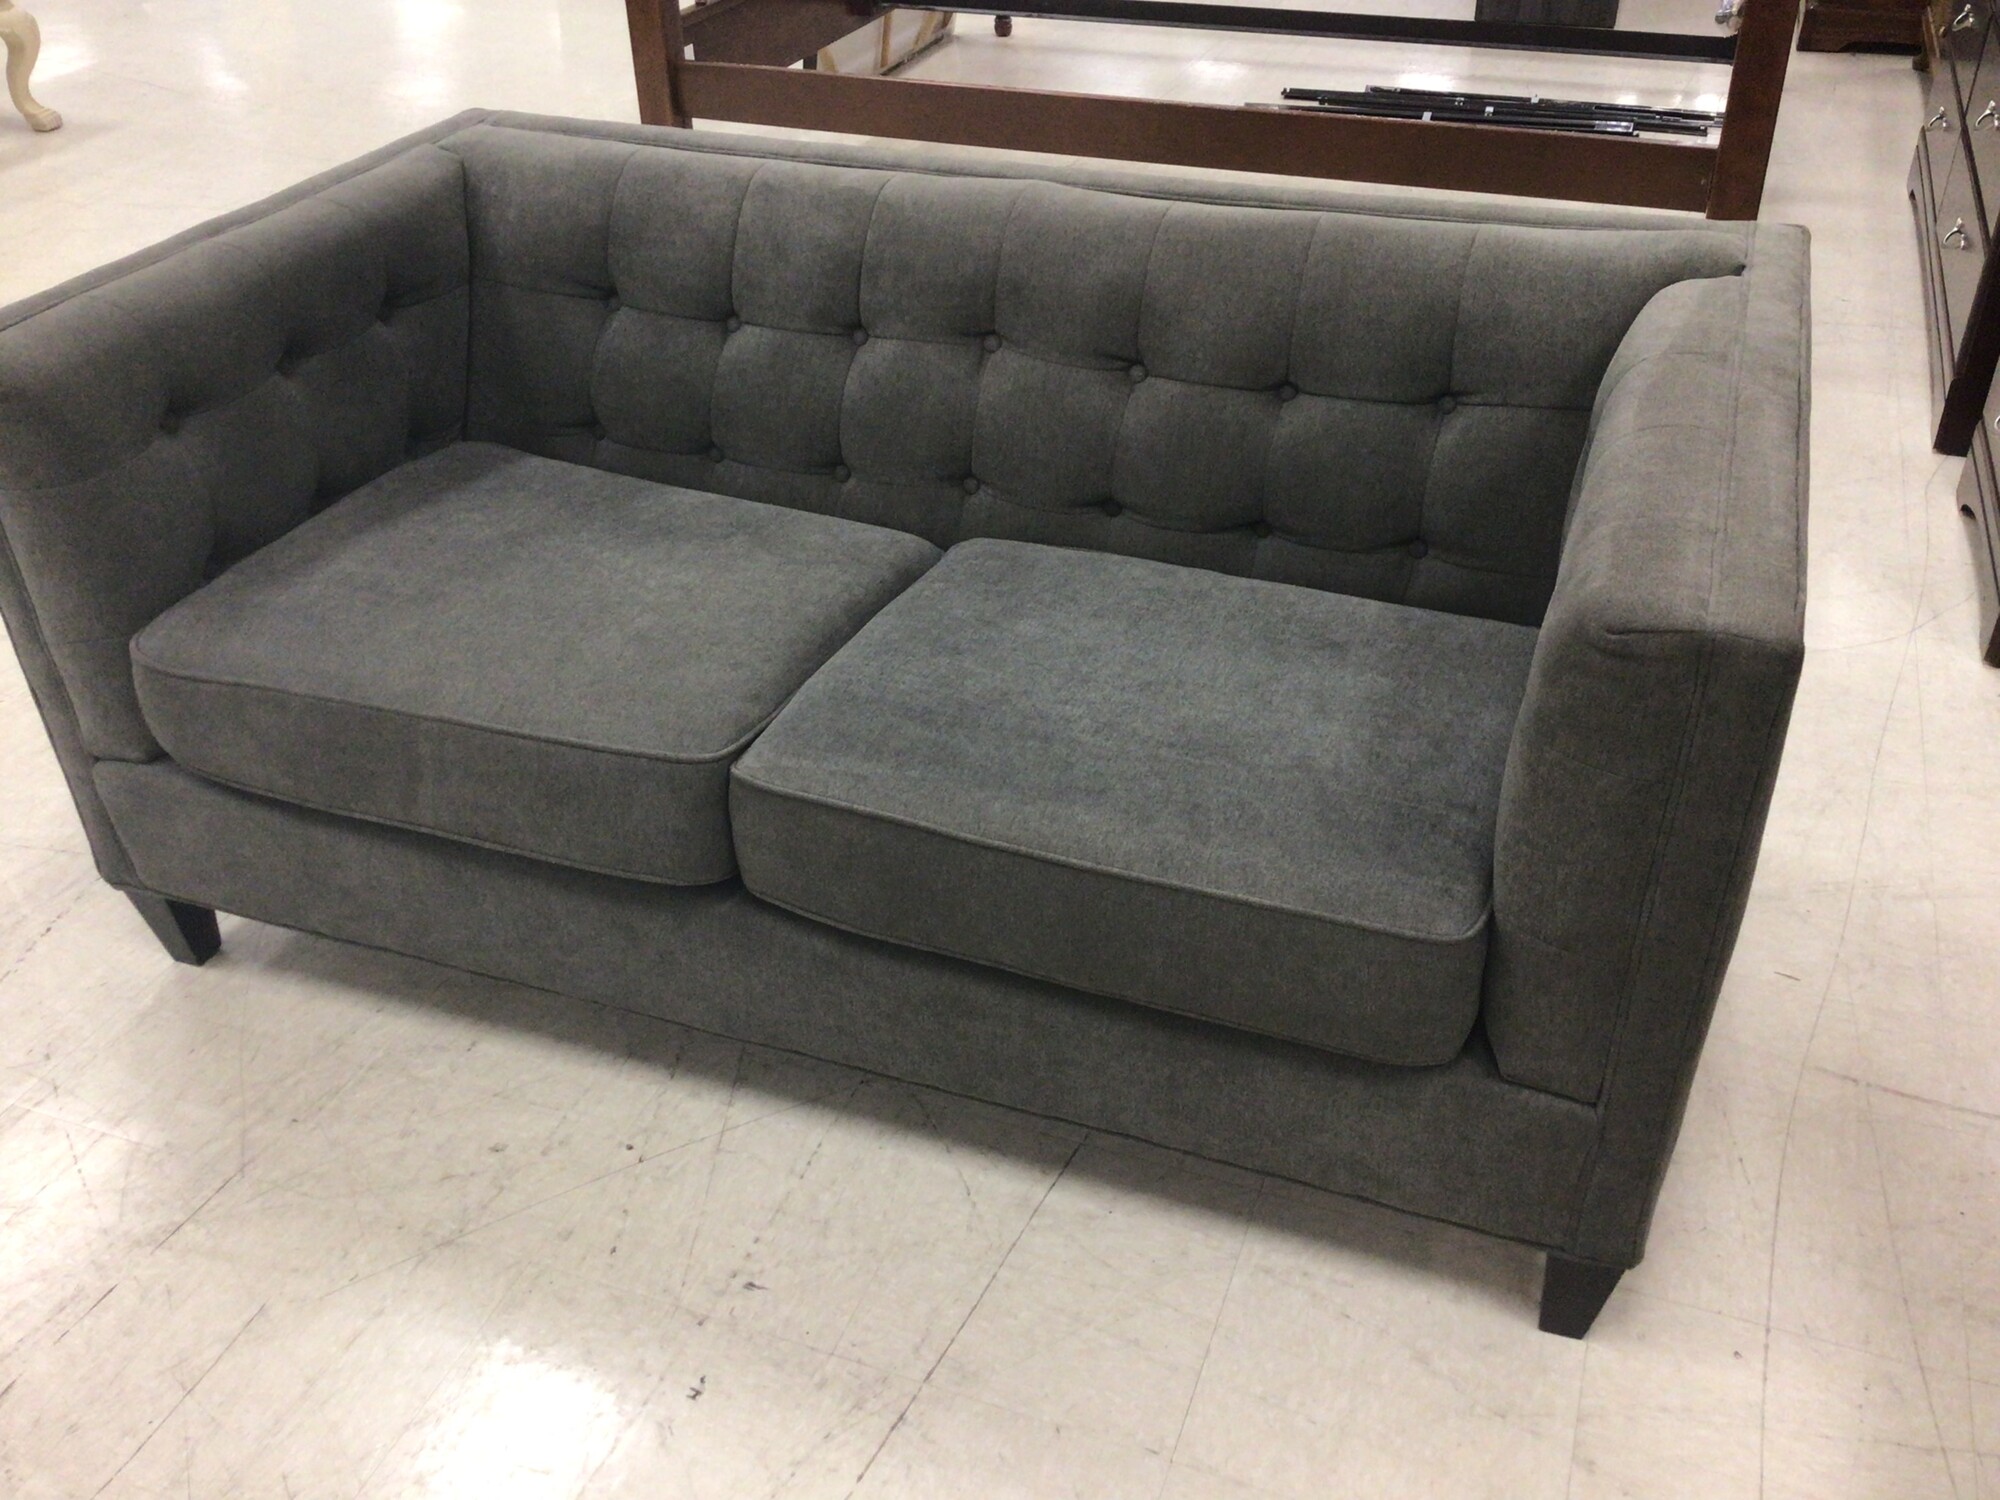 Gray Tufted Loveseat, Gray, W/ Pillows
62in wide